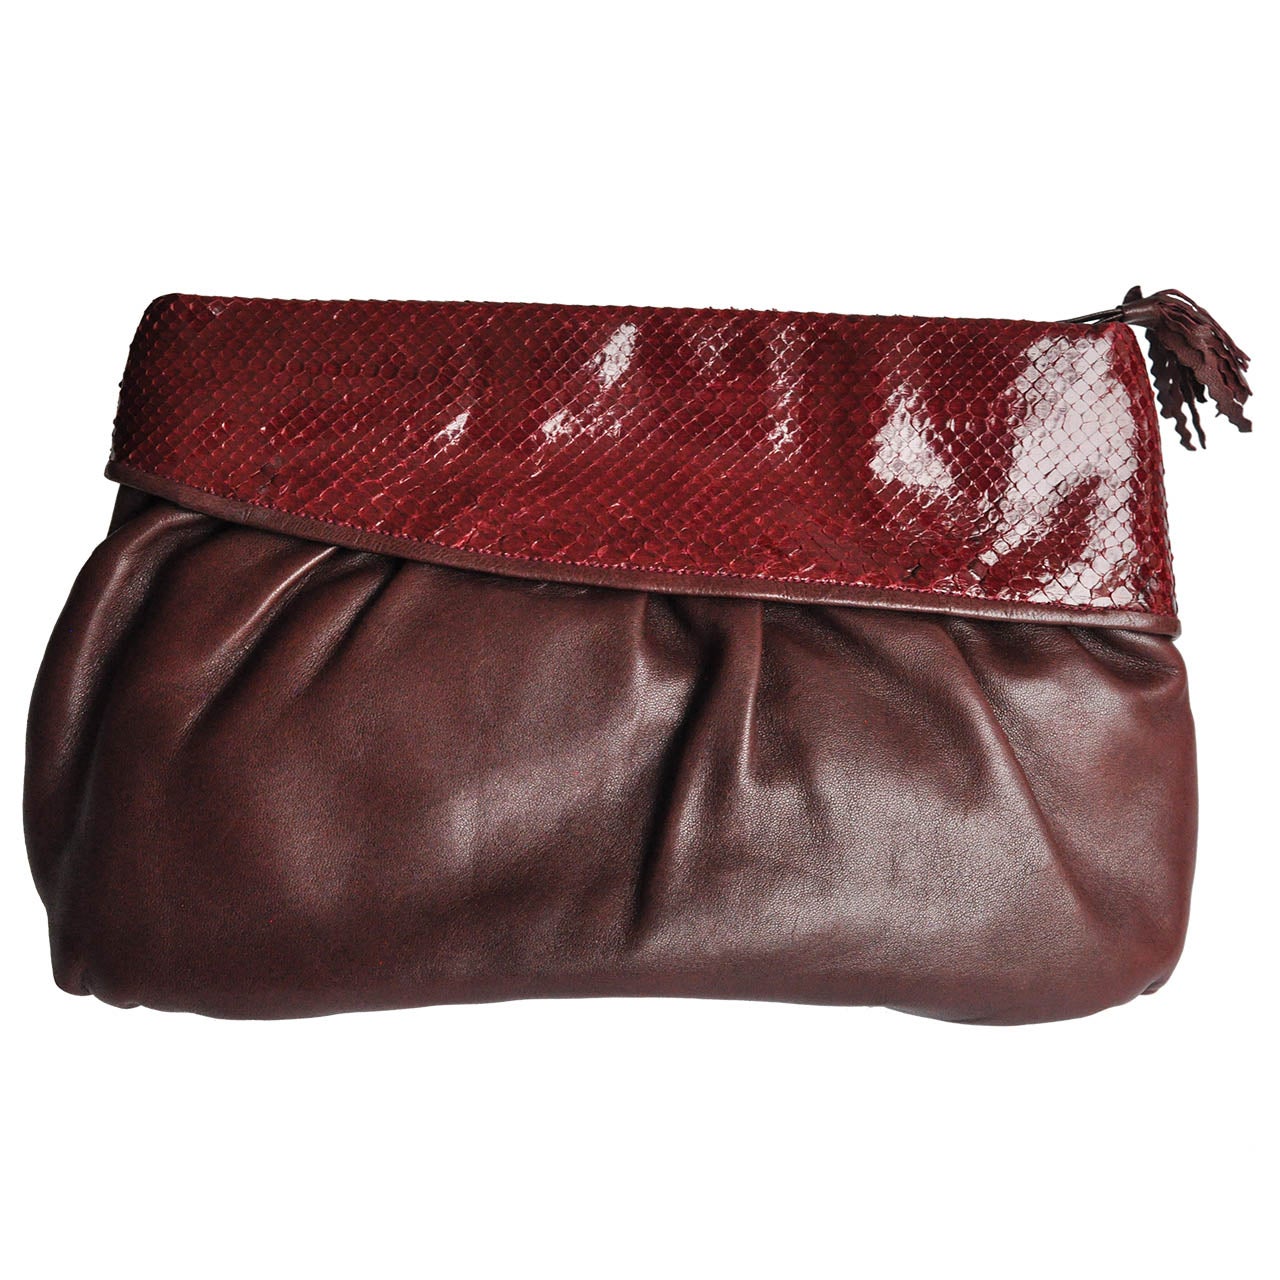 1980s Vintage Burgundy Snakeskin and Leather Clutch by Walter Katten For Sale